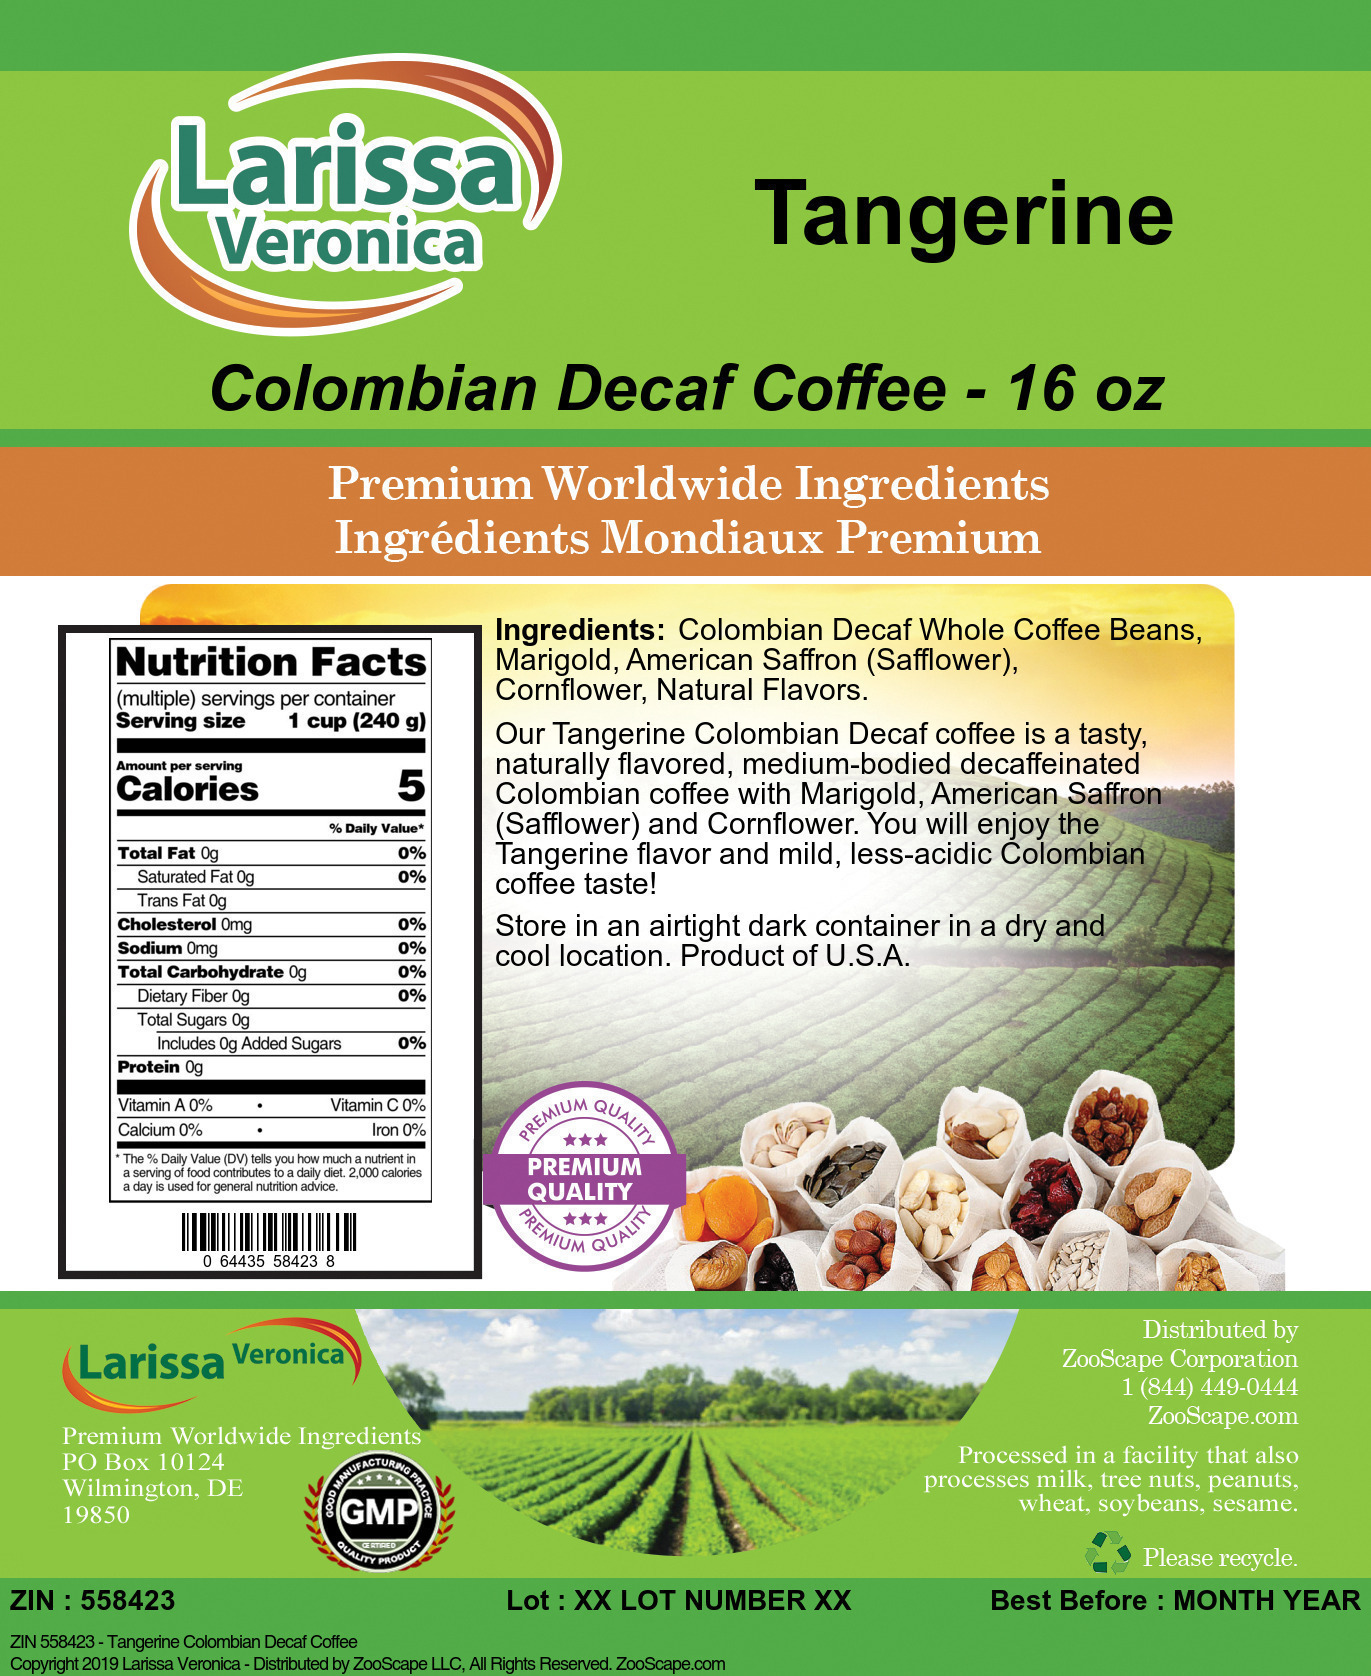 Tangerine Colombian Decaf Coffee - Label